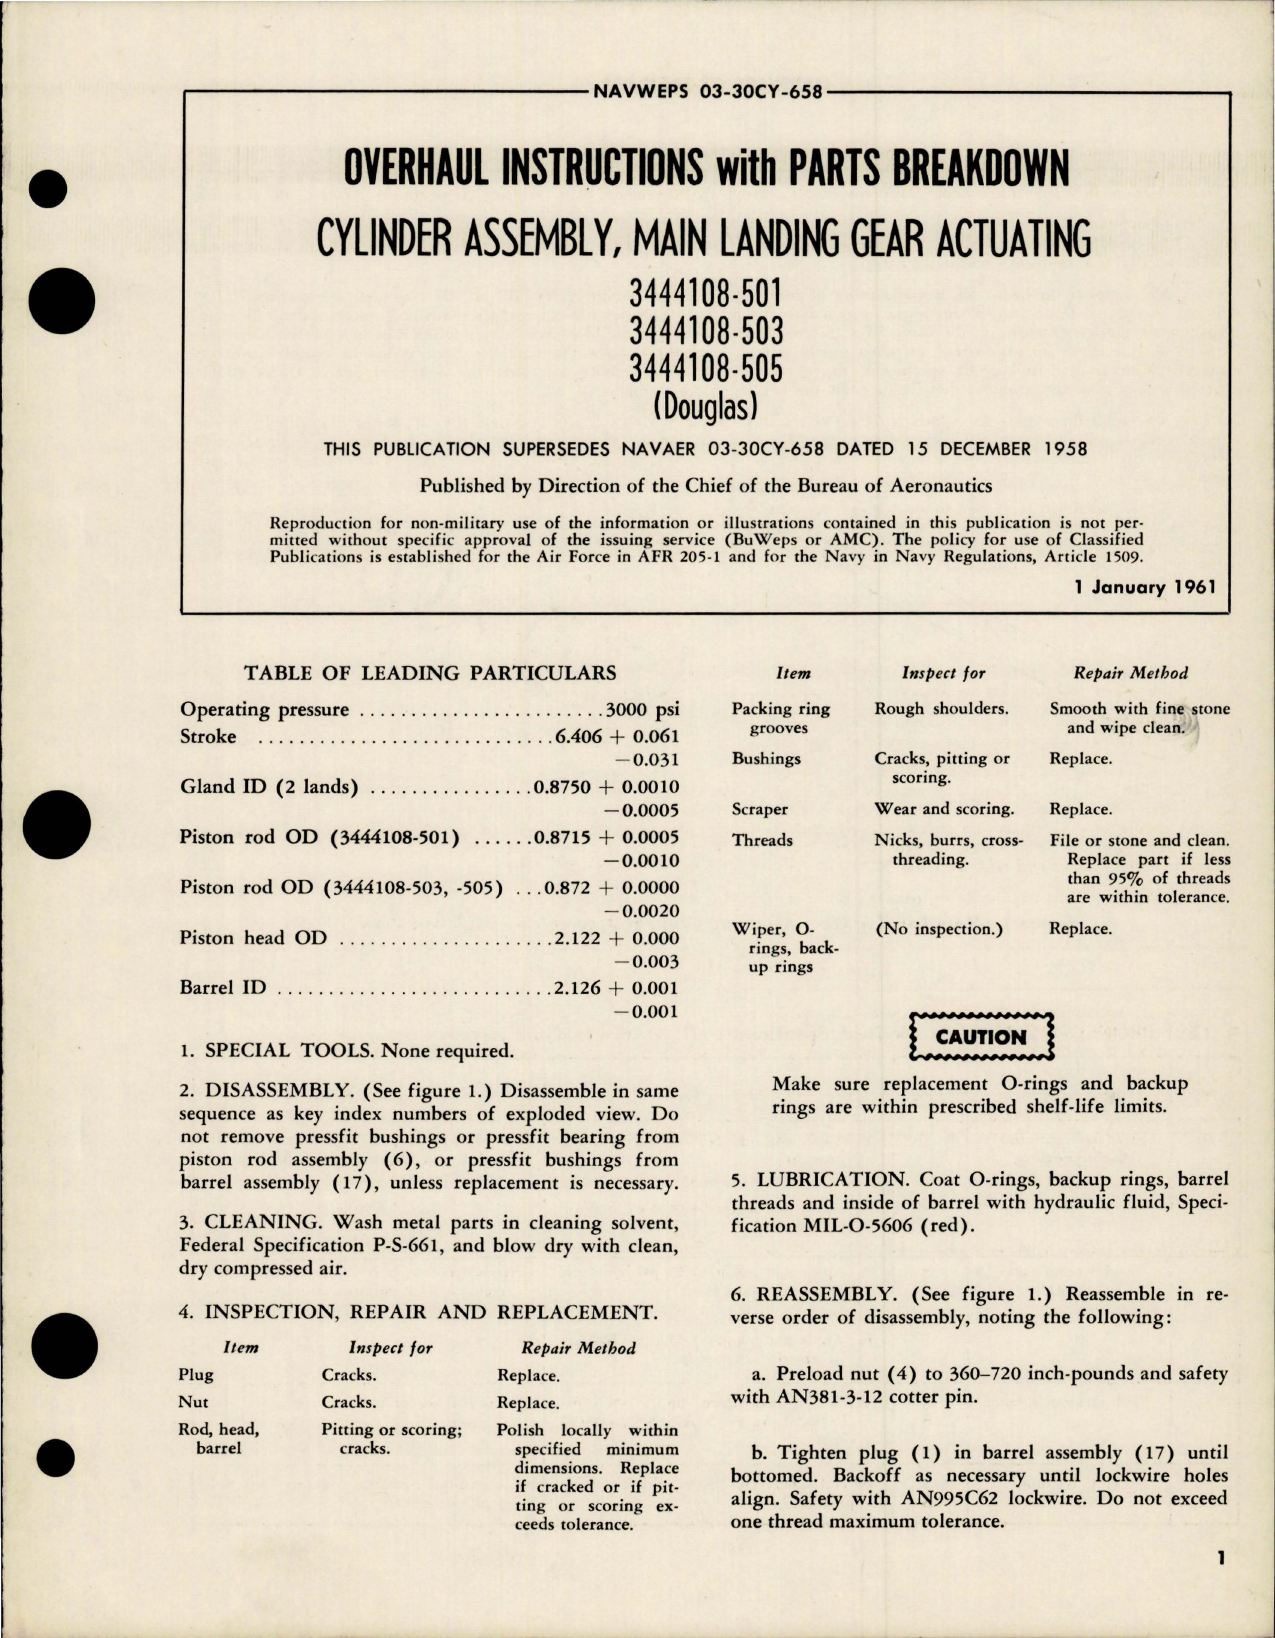 Sample page 1 from AirCorps Library document: Overhaul Instructions with Parts for Main Landing Gear Actuating Cylinder Assembly